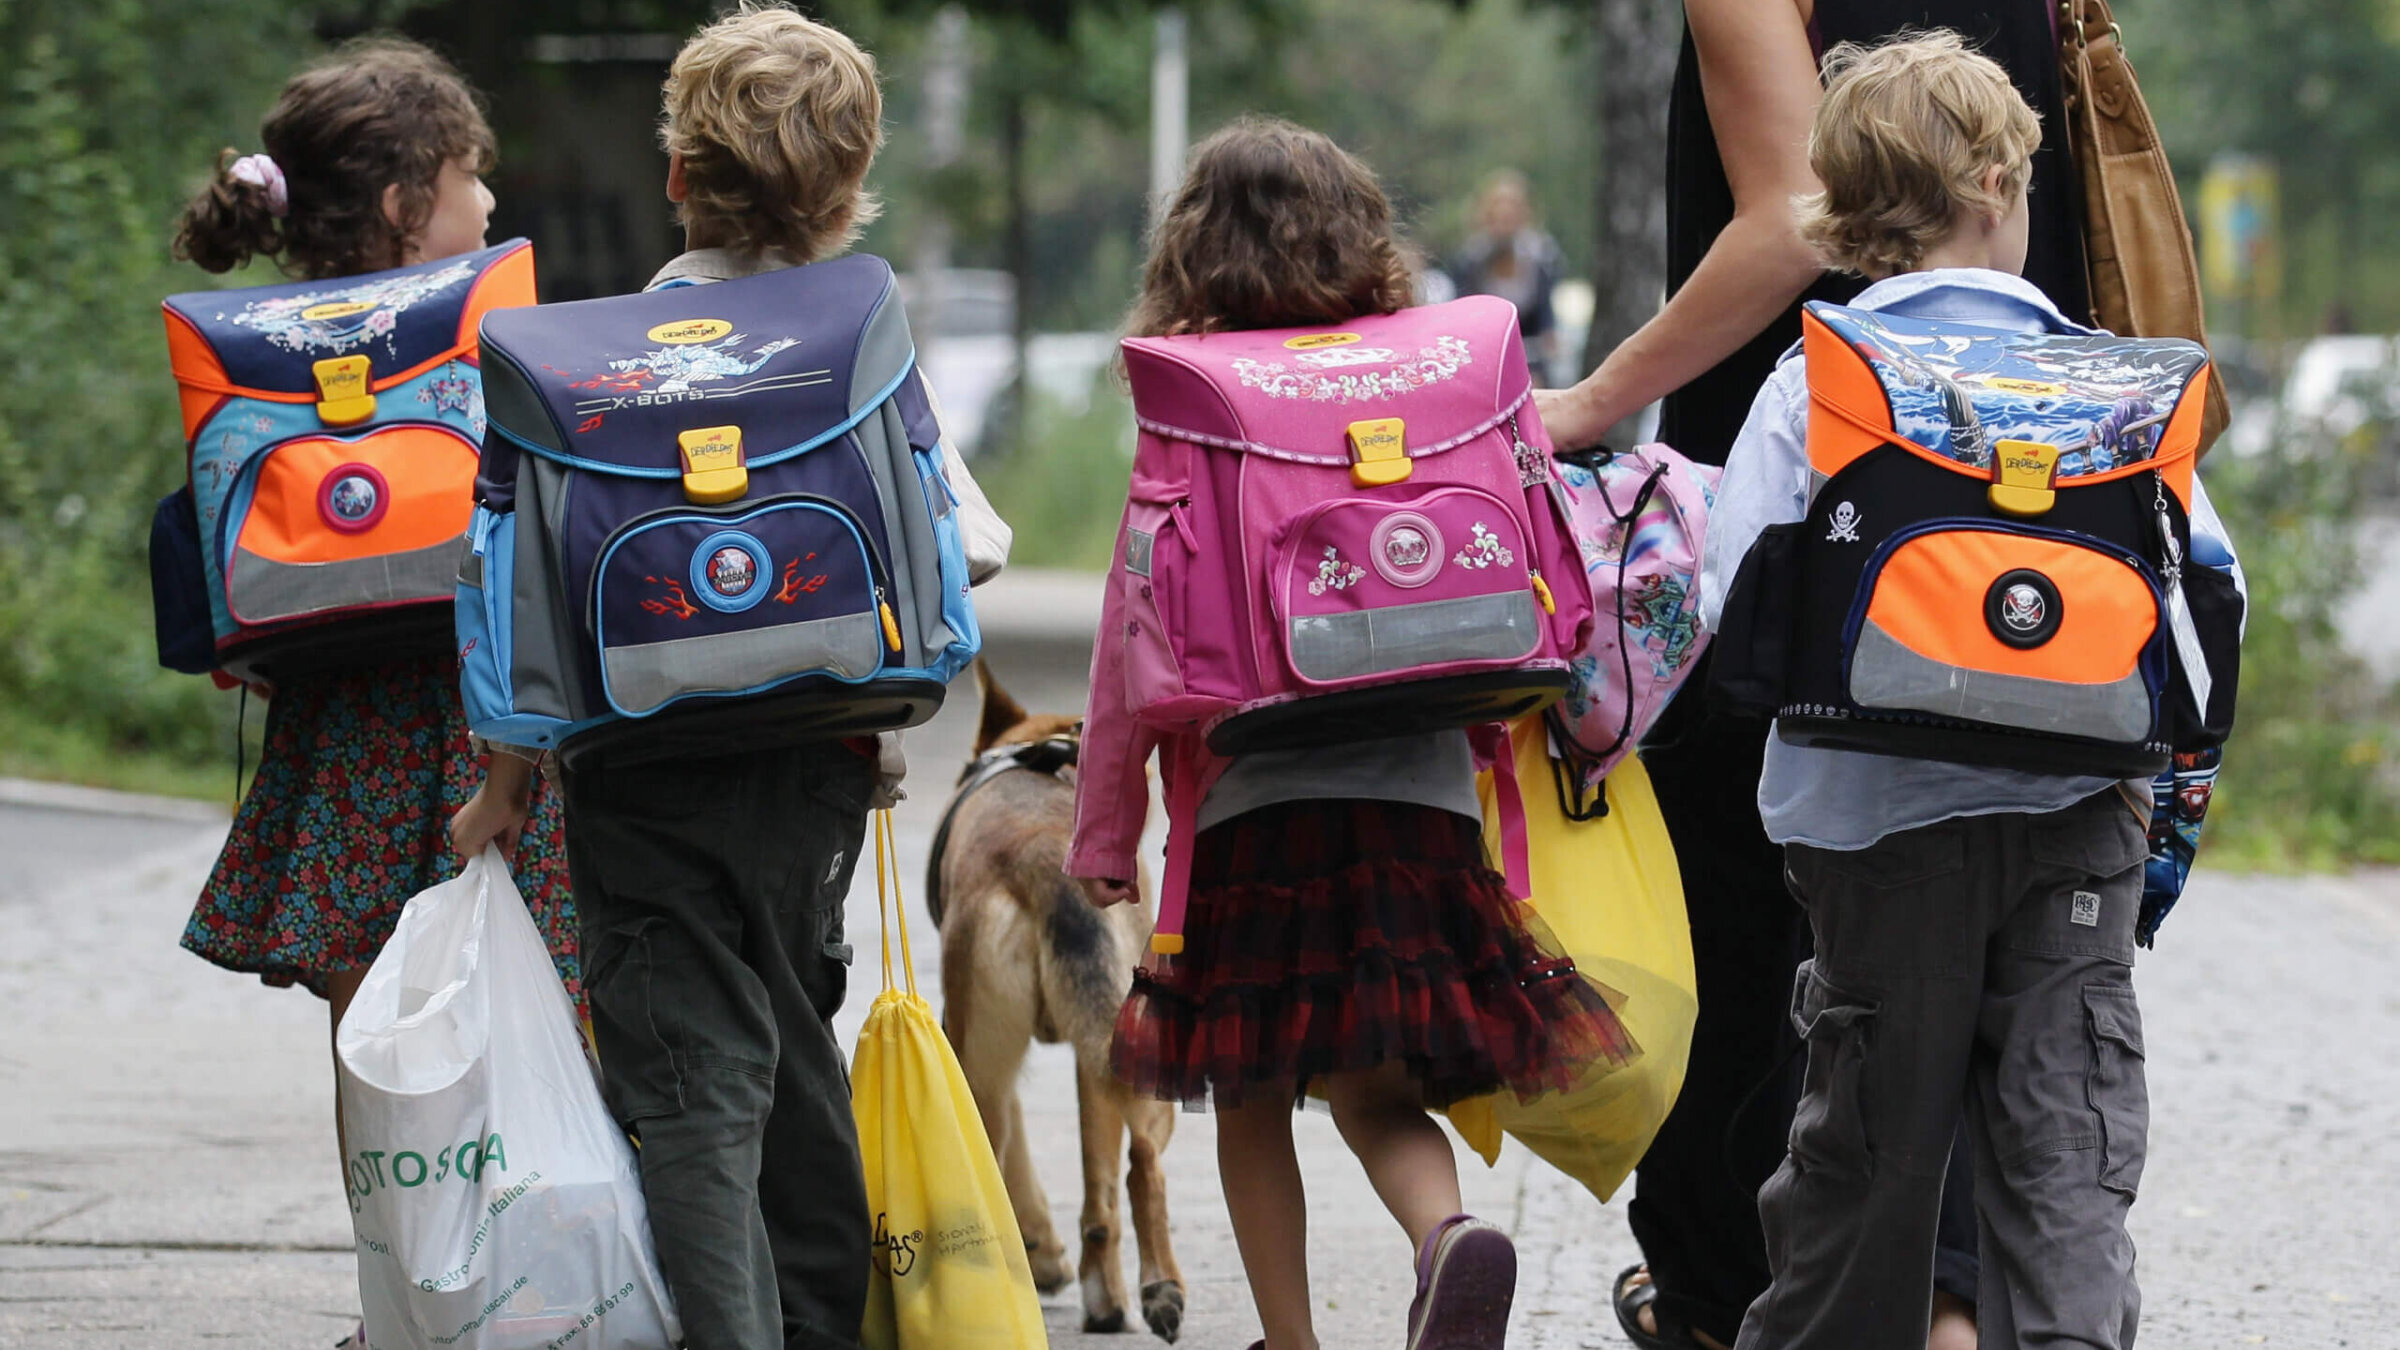 Children walk down the way on the first school day on August 23, 2010 in Berlin, Germany. 